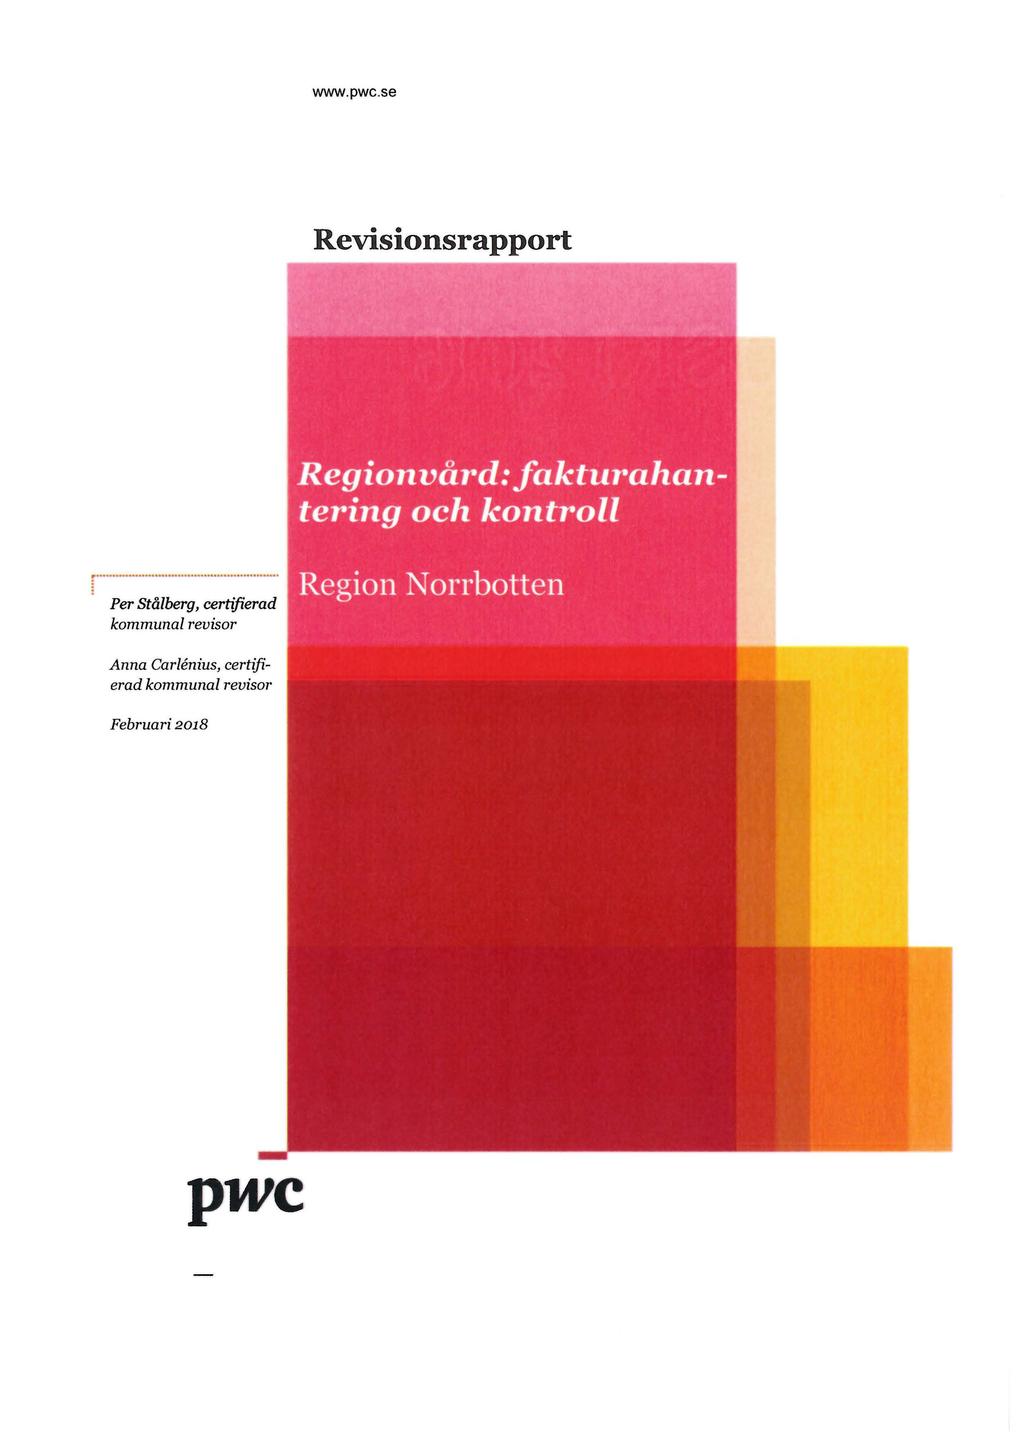 www.pwc.se Revisionsrapport r -- -.